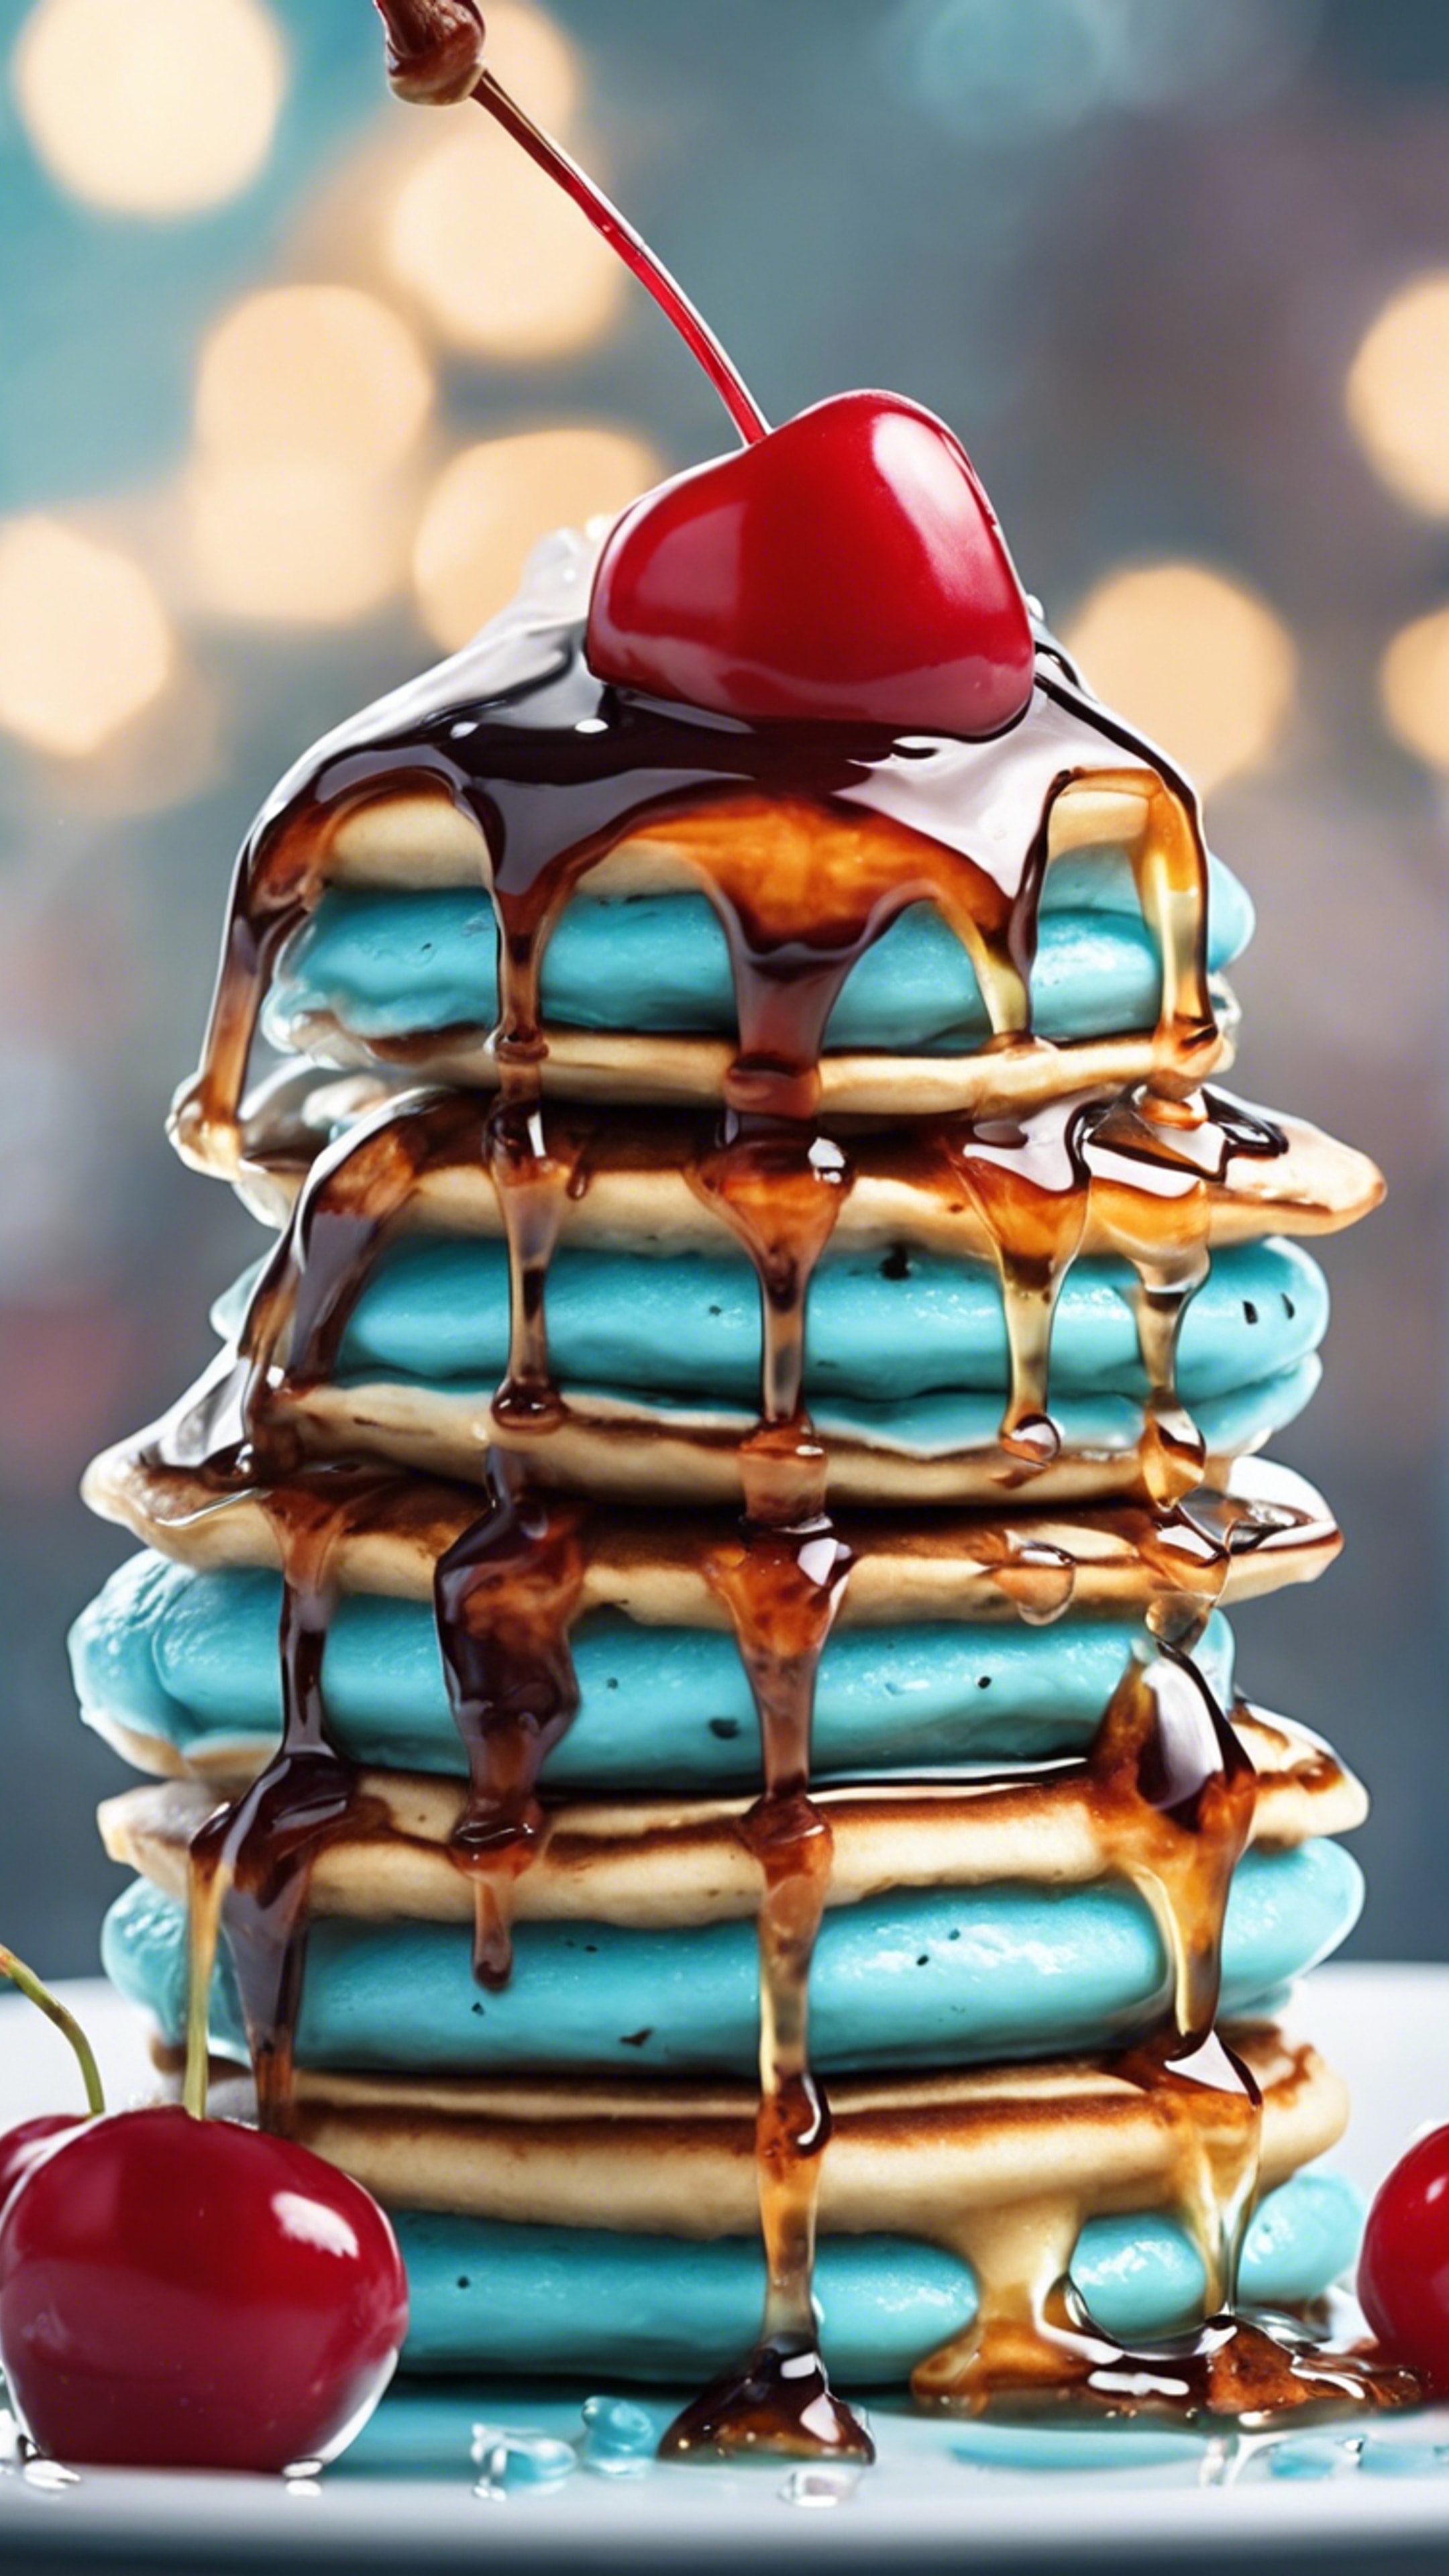 A stack of kawaii light blue pancakes dripping with syrup and a cherry on top. ورق الجدران[05c3a9af3a95463c8379]